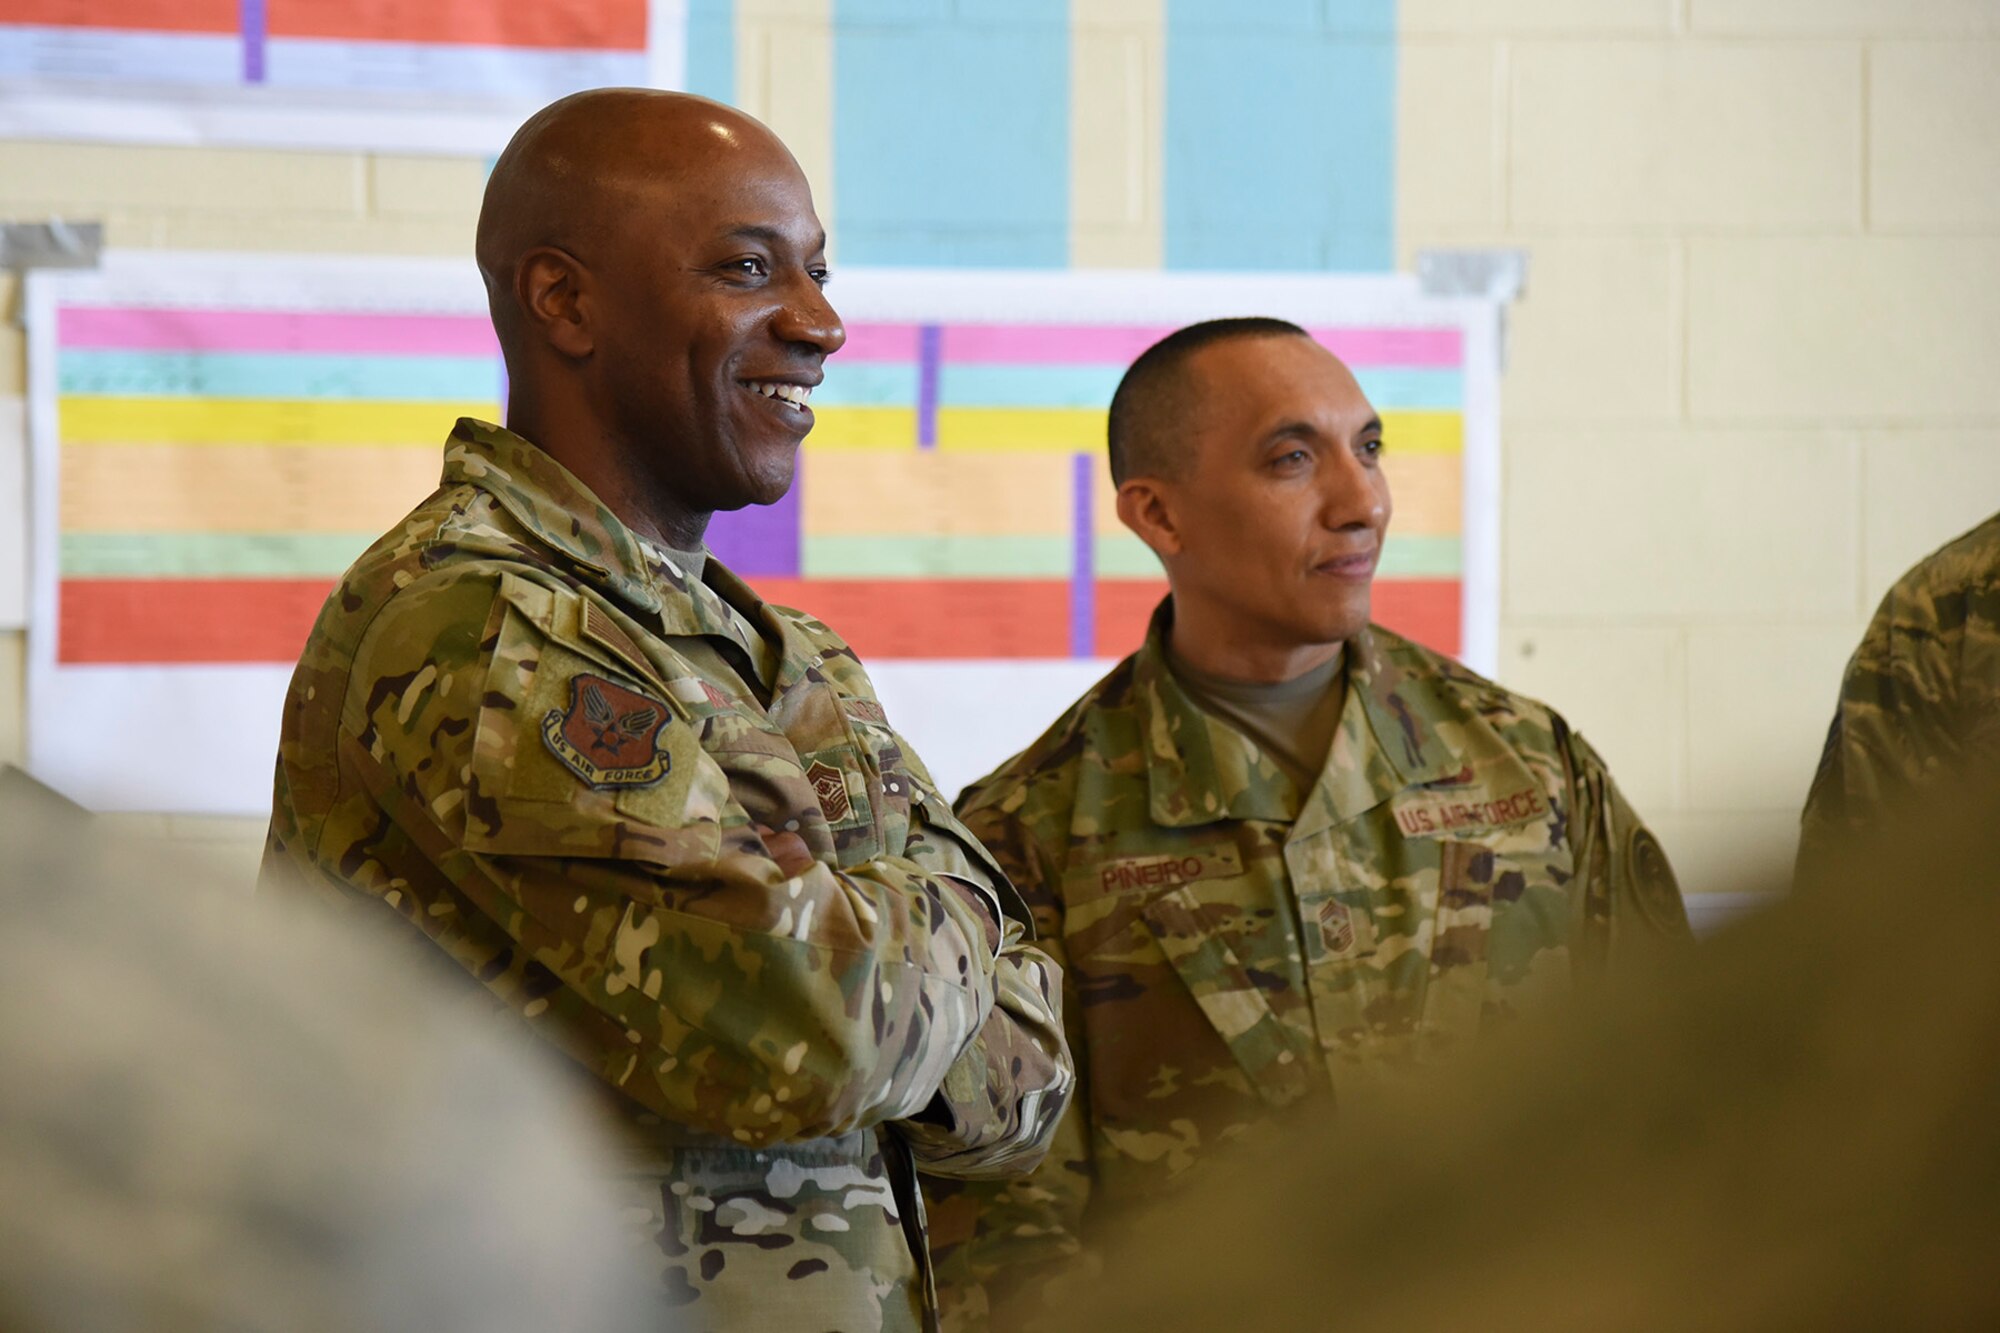 Chief Master Sgt. of the Air Force Kaleth O. Wright and Chief Master Sgt. Manny Piñeiro, Air Force first sergeant special duty manager, meet with 92nd and 141st Maintenance Group Airmen to discuss the streamlining of the periodic inspection process at Fairchild Air Force Base, March 22, 2019. The periodic inspection is the most in-depth inspection Fairchild maintainers conduct on the KC-135 Stratotanker. The two-week inspection is conducted every 24 months, 1,800 flight hours or 1,000 landings. (U.S. Air Force photo by Staff Sgt. Mackenzie Mendez)